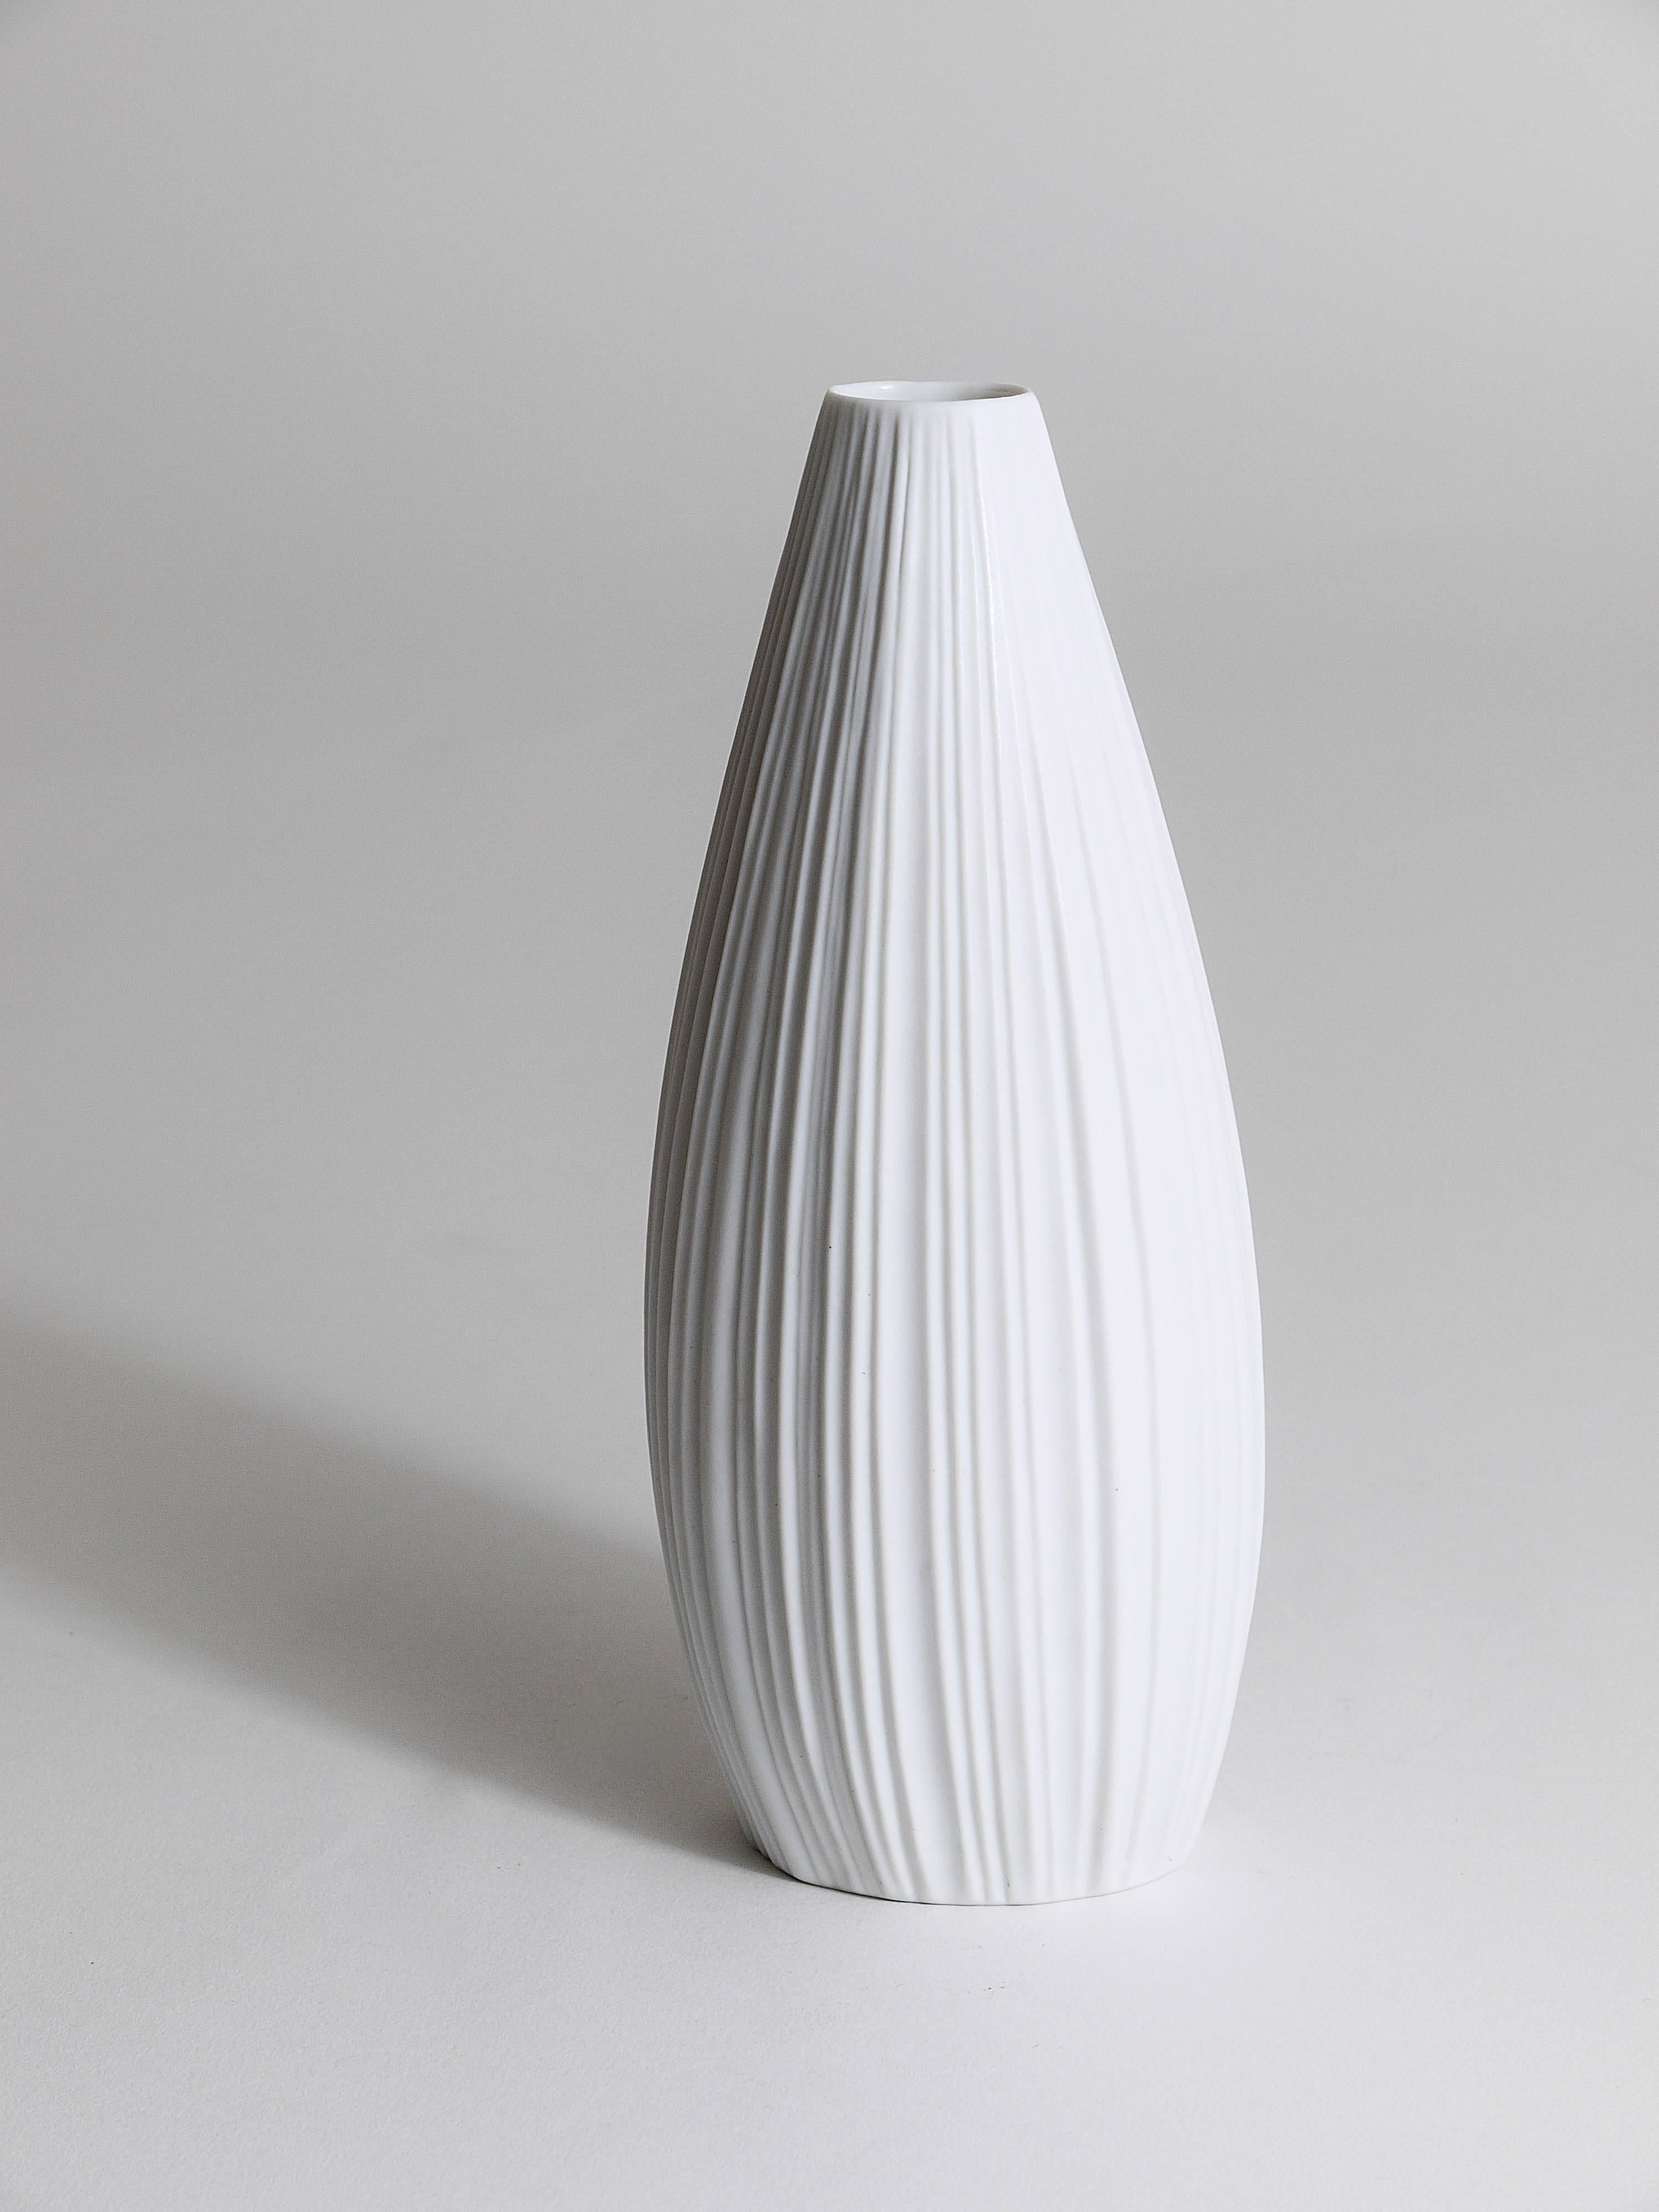 A beautiful white matte striped relief biscuit porcelain vase from the 1960s, designed by Martin Freyer, executed by Rosenthal, Germany. In very good condition.